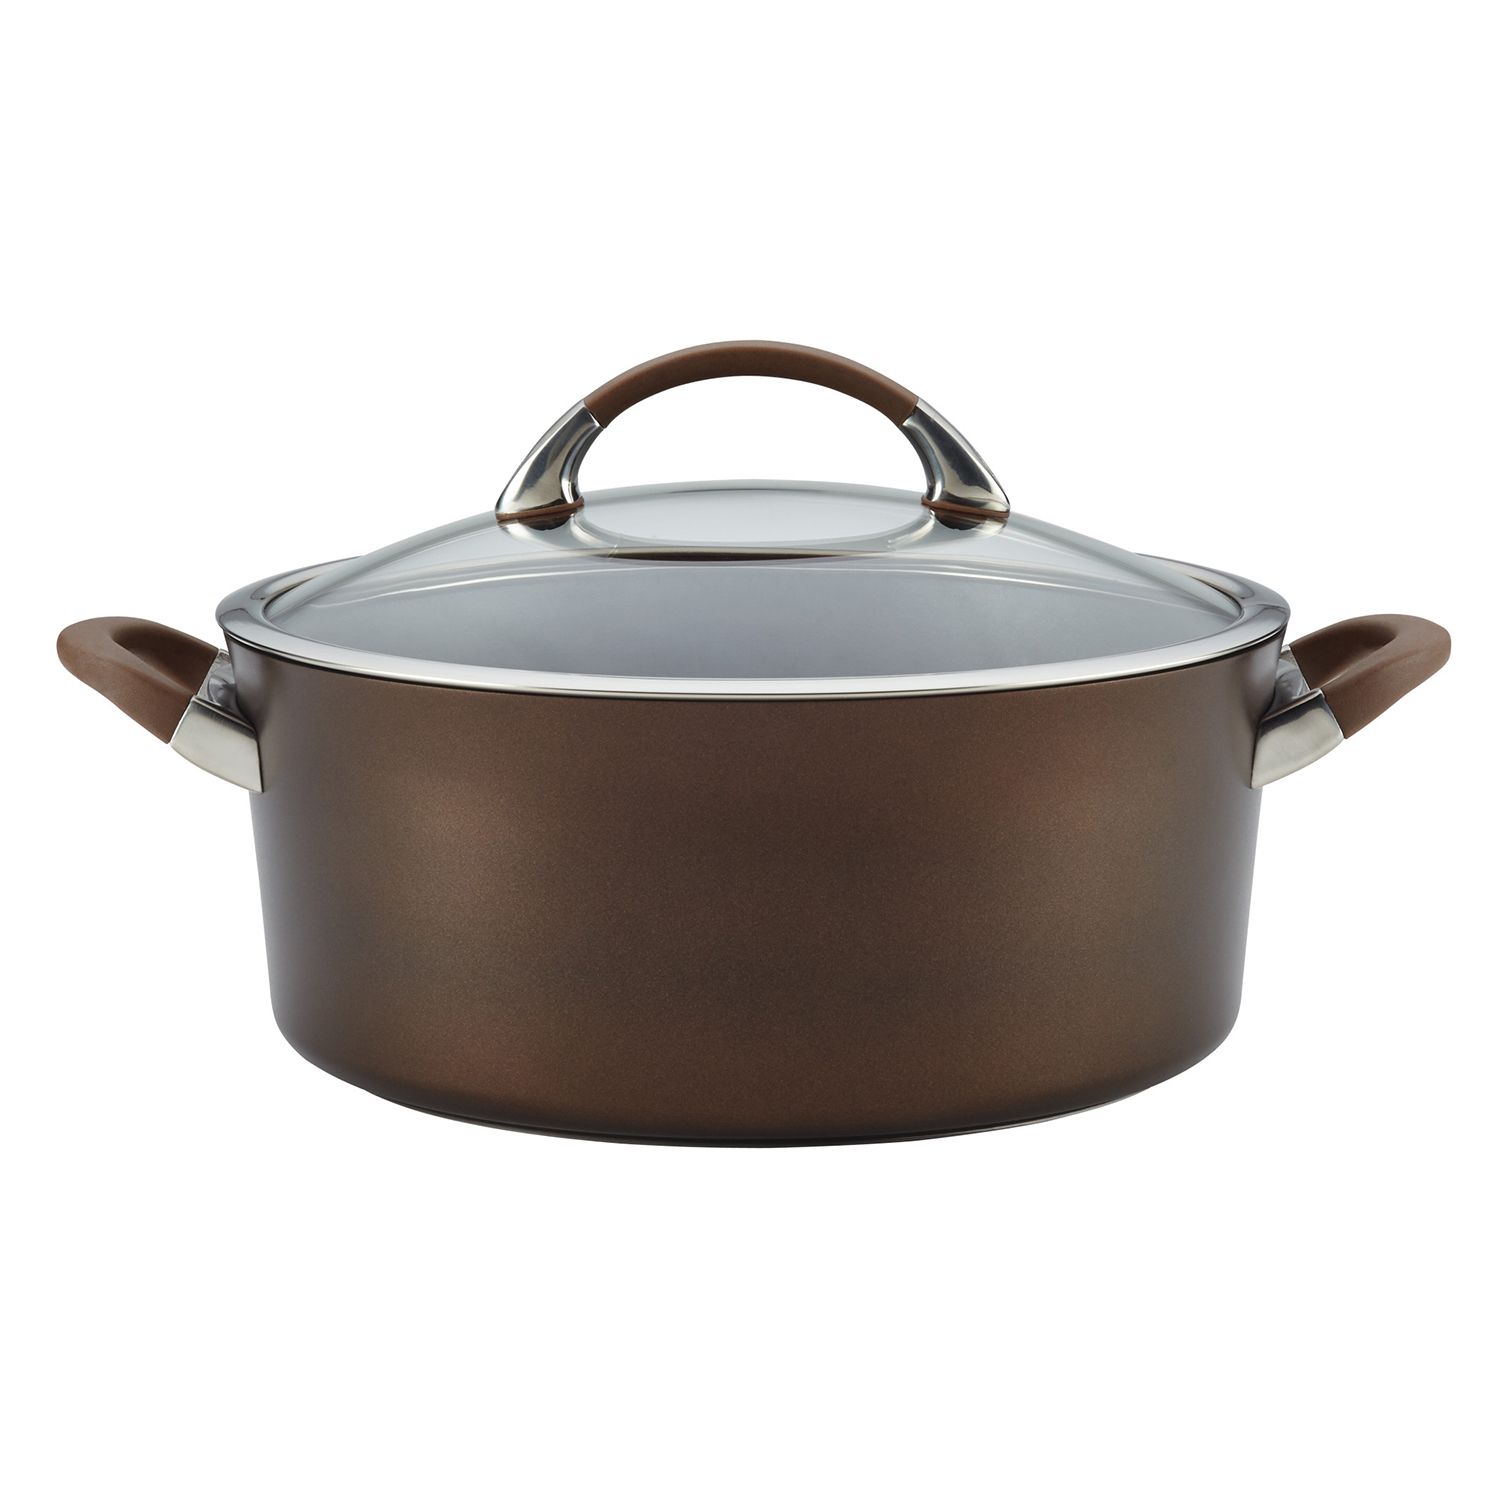 Saveur Selects Voyage Series 4.5qt Enameled Cast Iron Braiser With